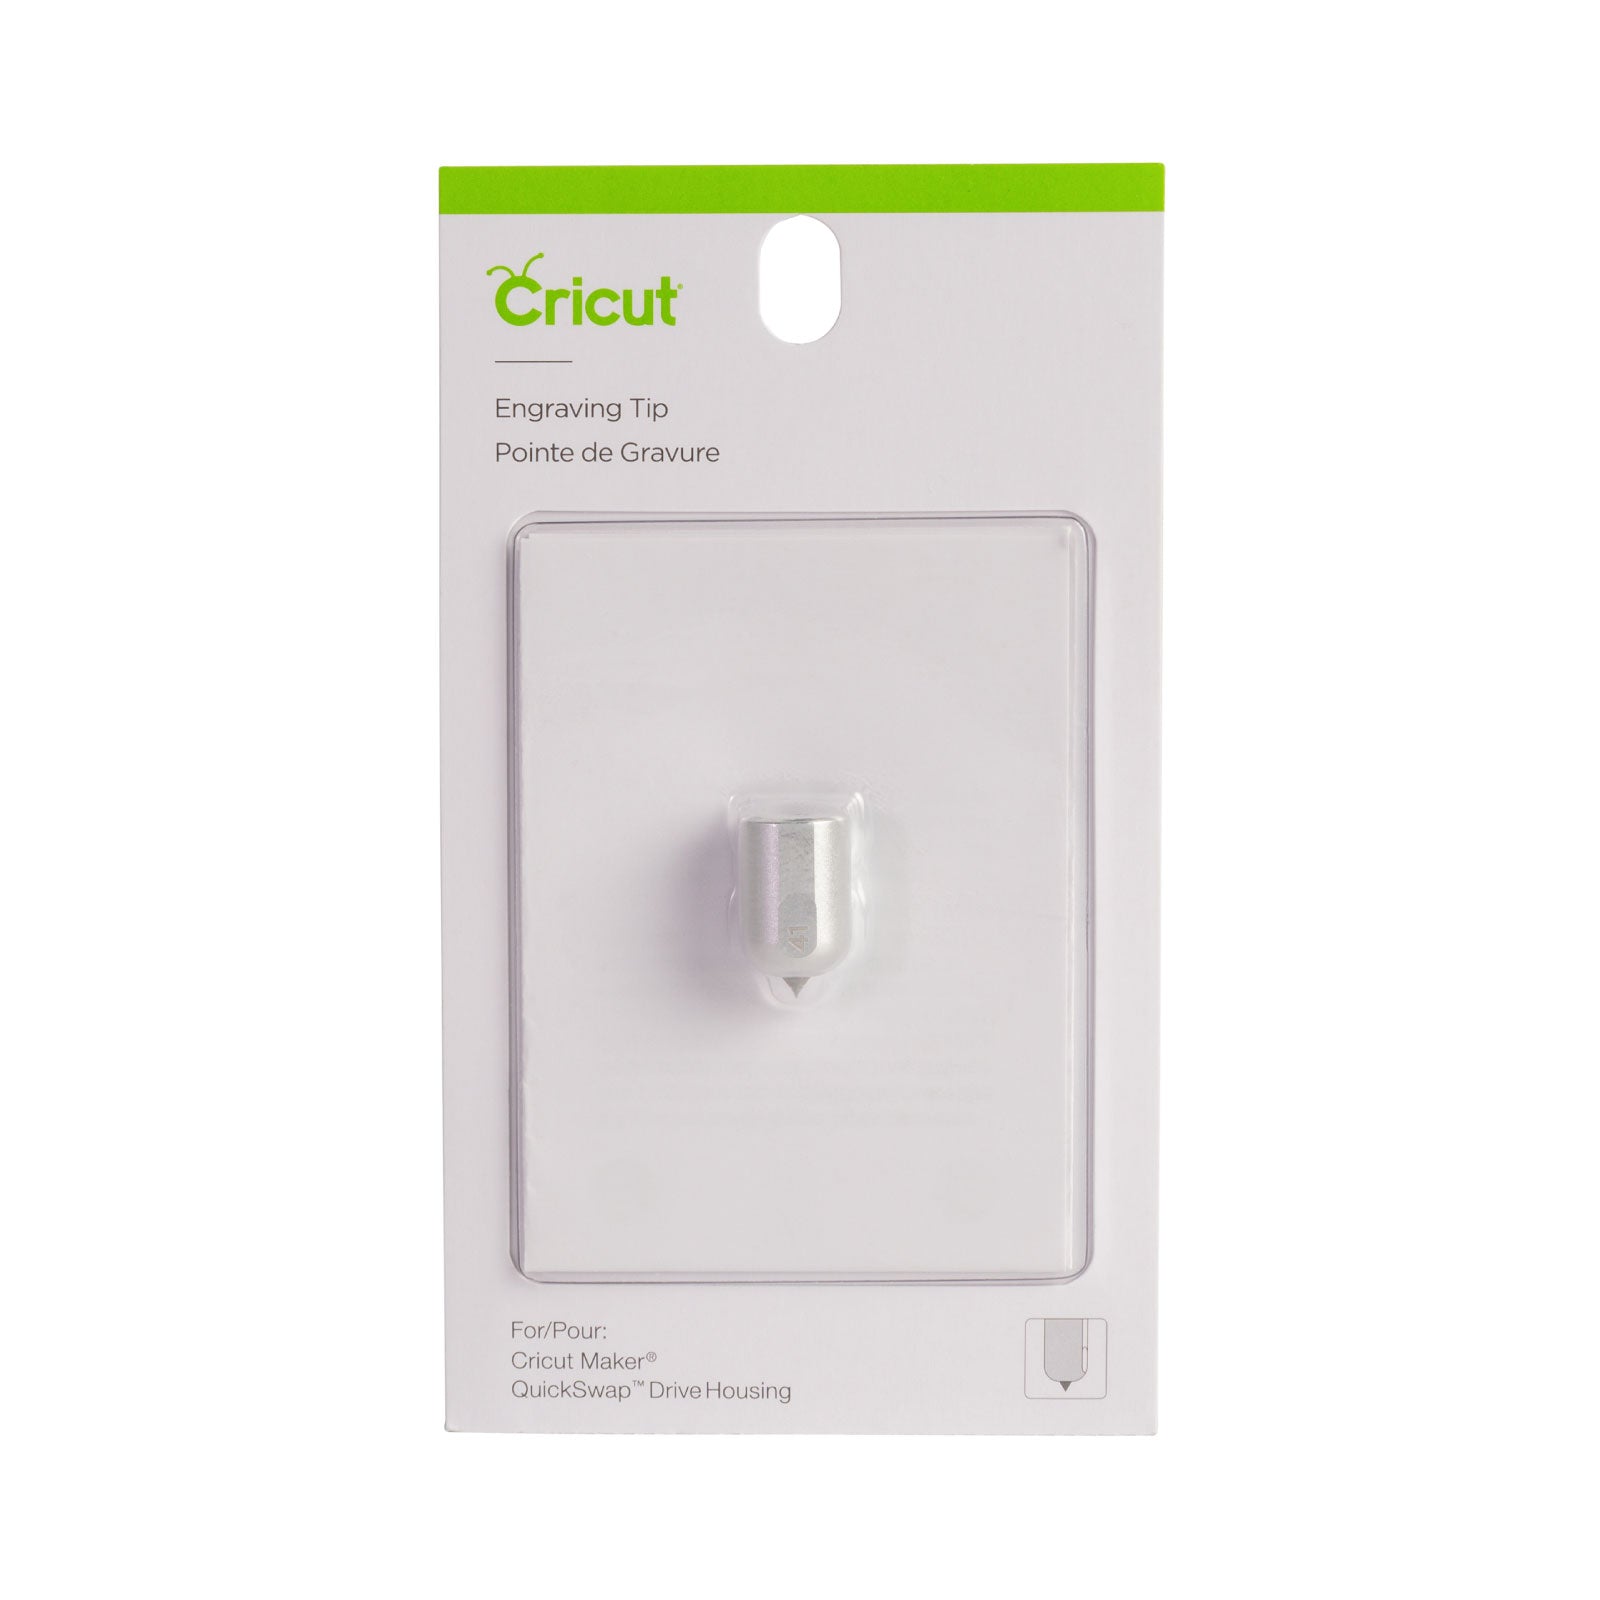 Cricut Maker Knife Blade and Housing, Wavy Blade and Engraving Tip Bundle